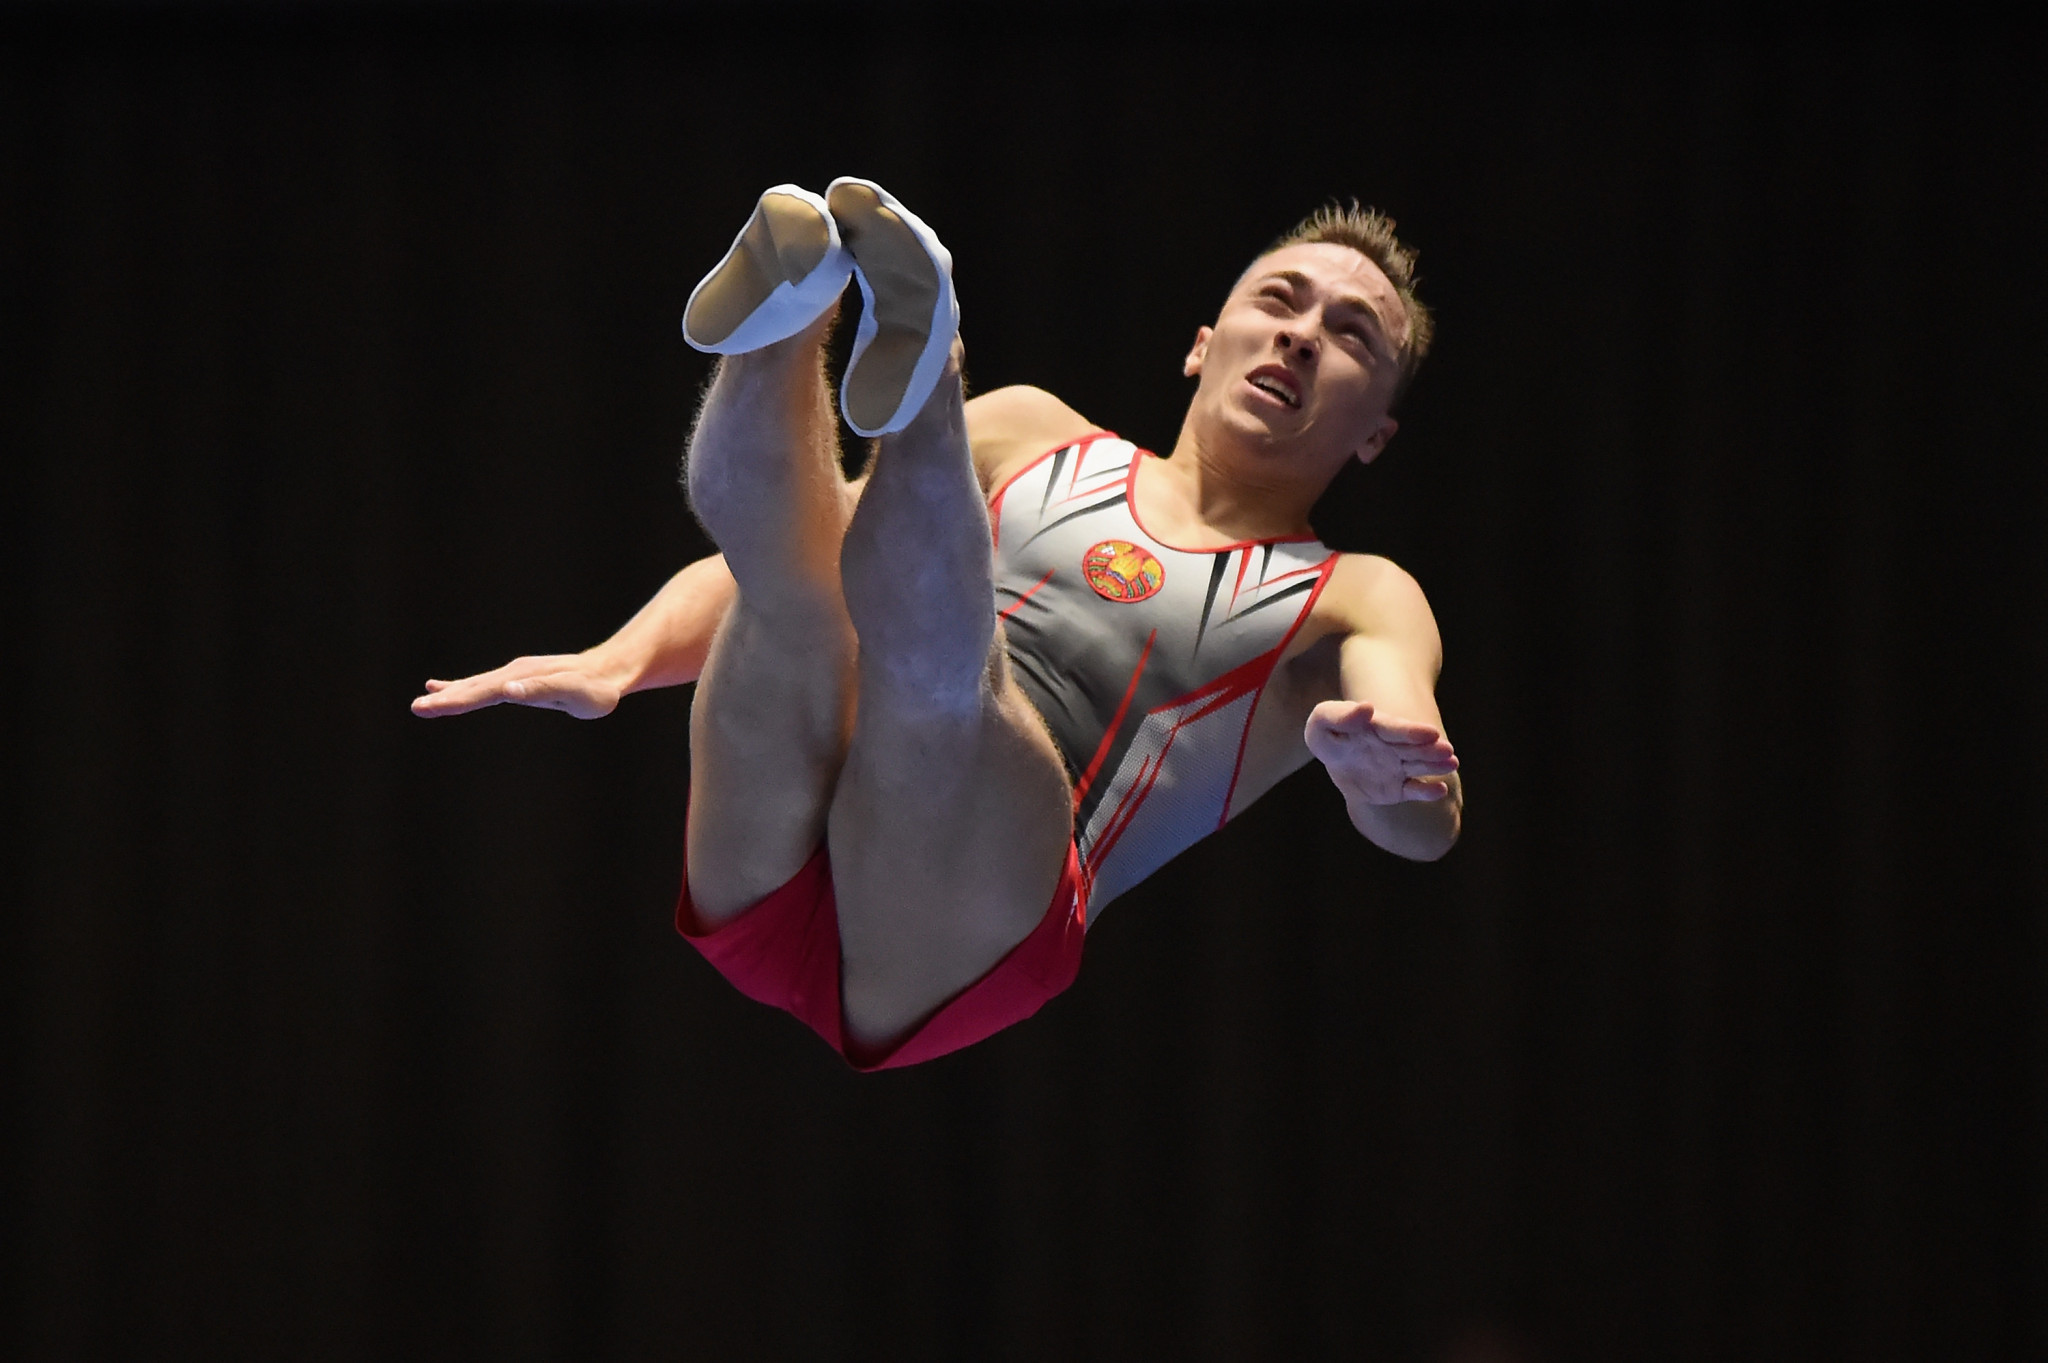 Rio 2016 individual champion Uladzislau Hancharou helped Belarus to an unexpected men's trampoline world title ©Getty Images